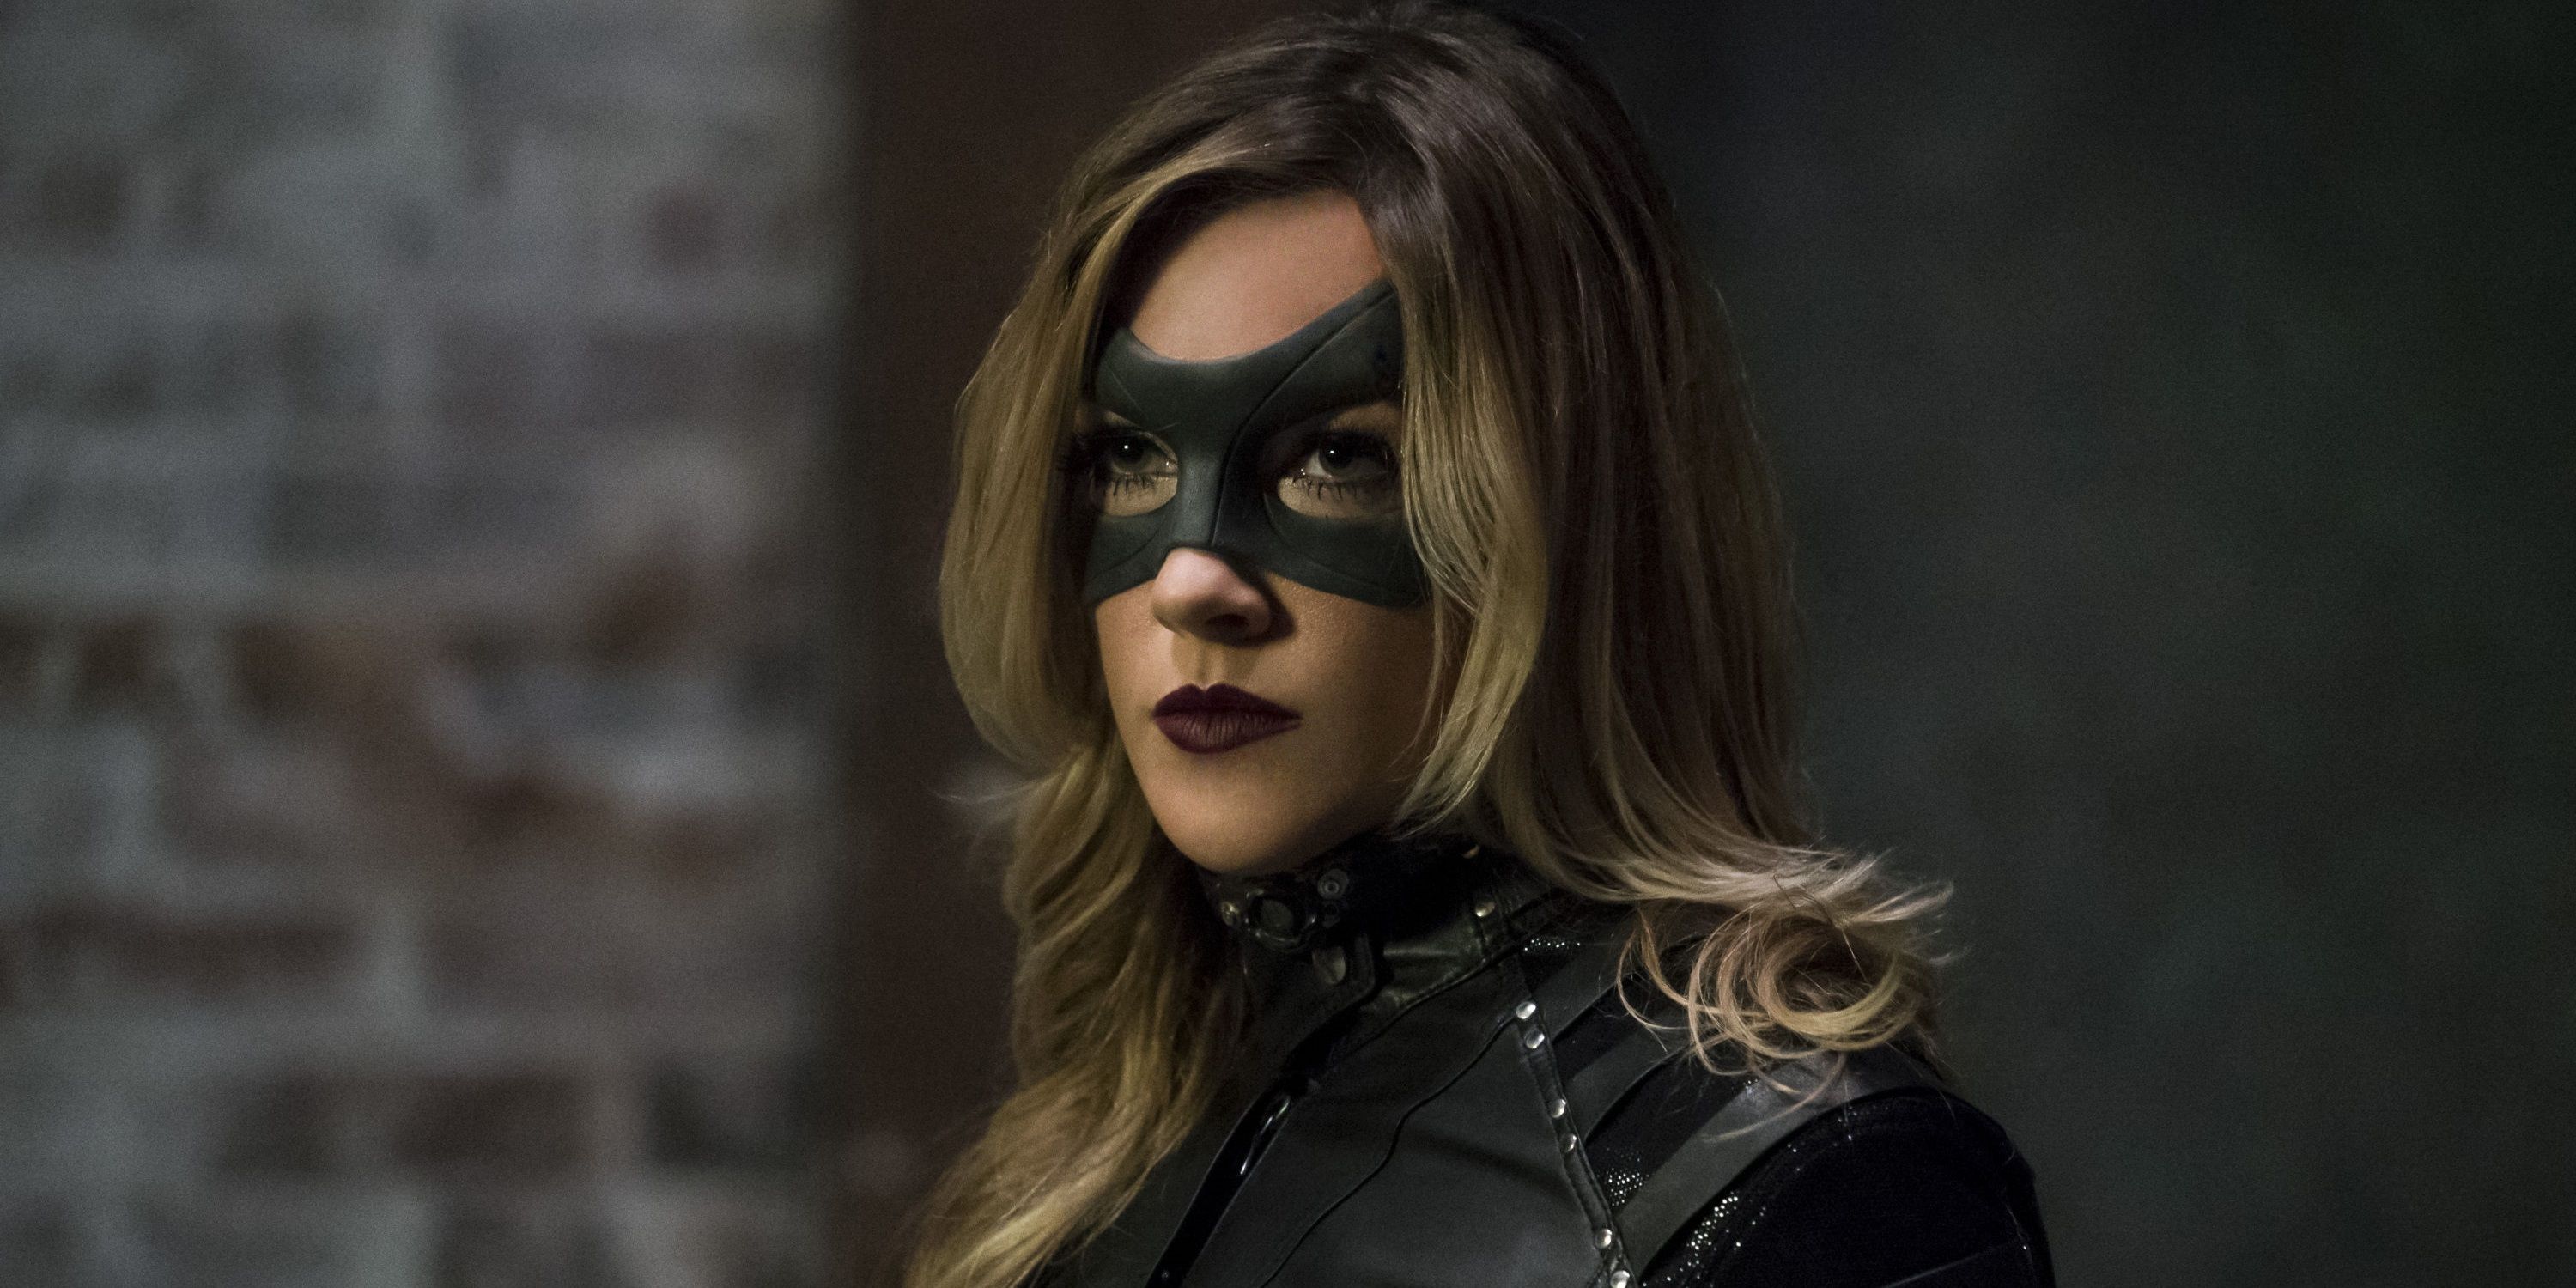 Laurel Lance as the Black Canary in Arrow